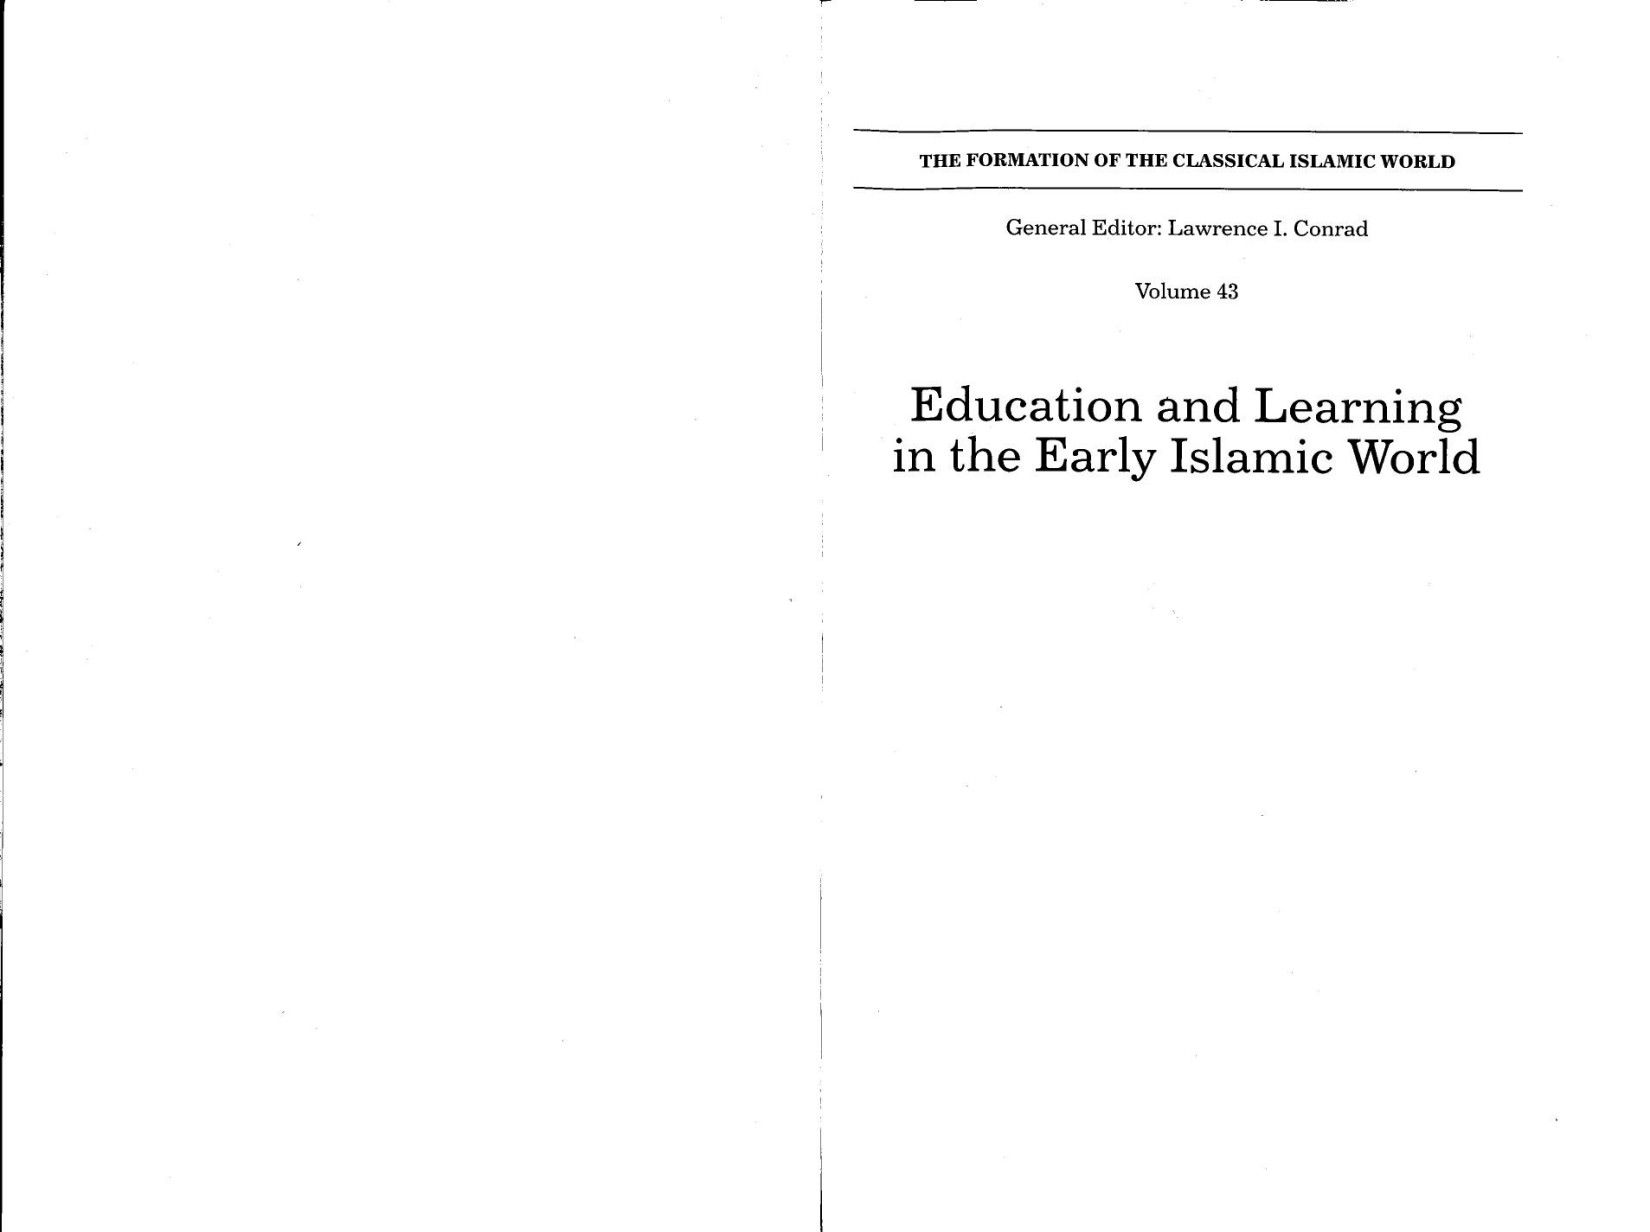 Education and Learning in the Early Islamic World 2012.pdf